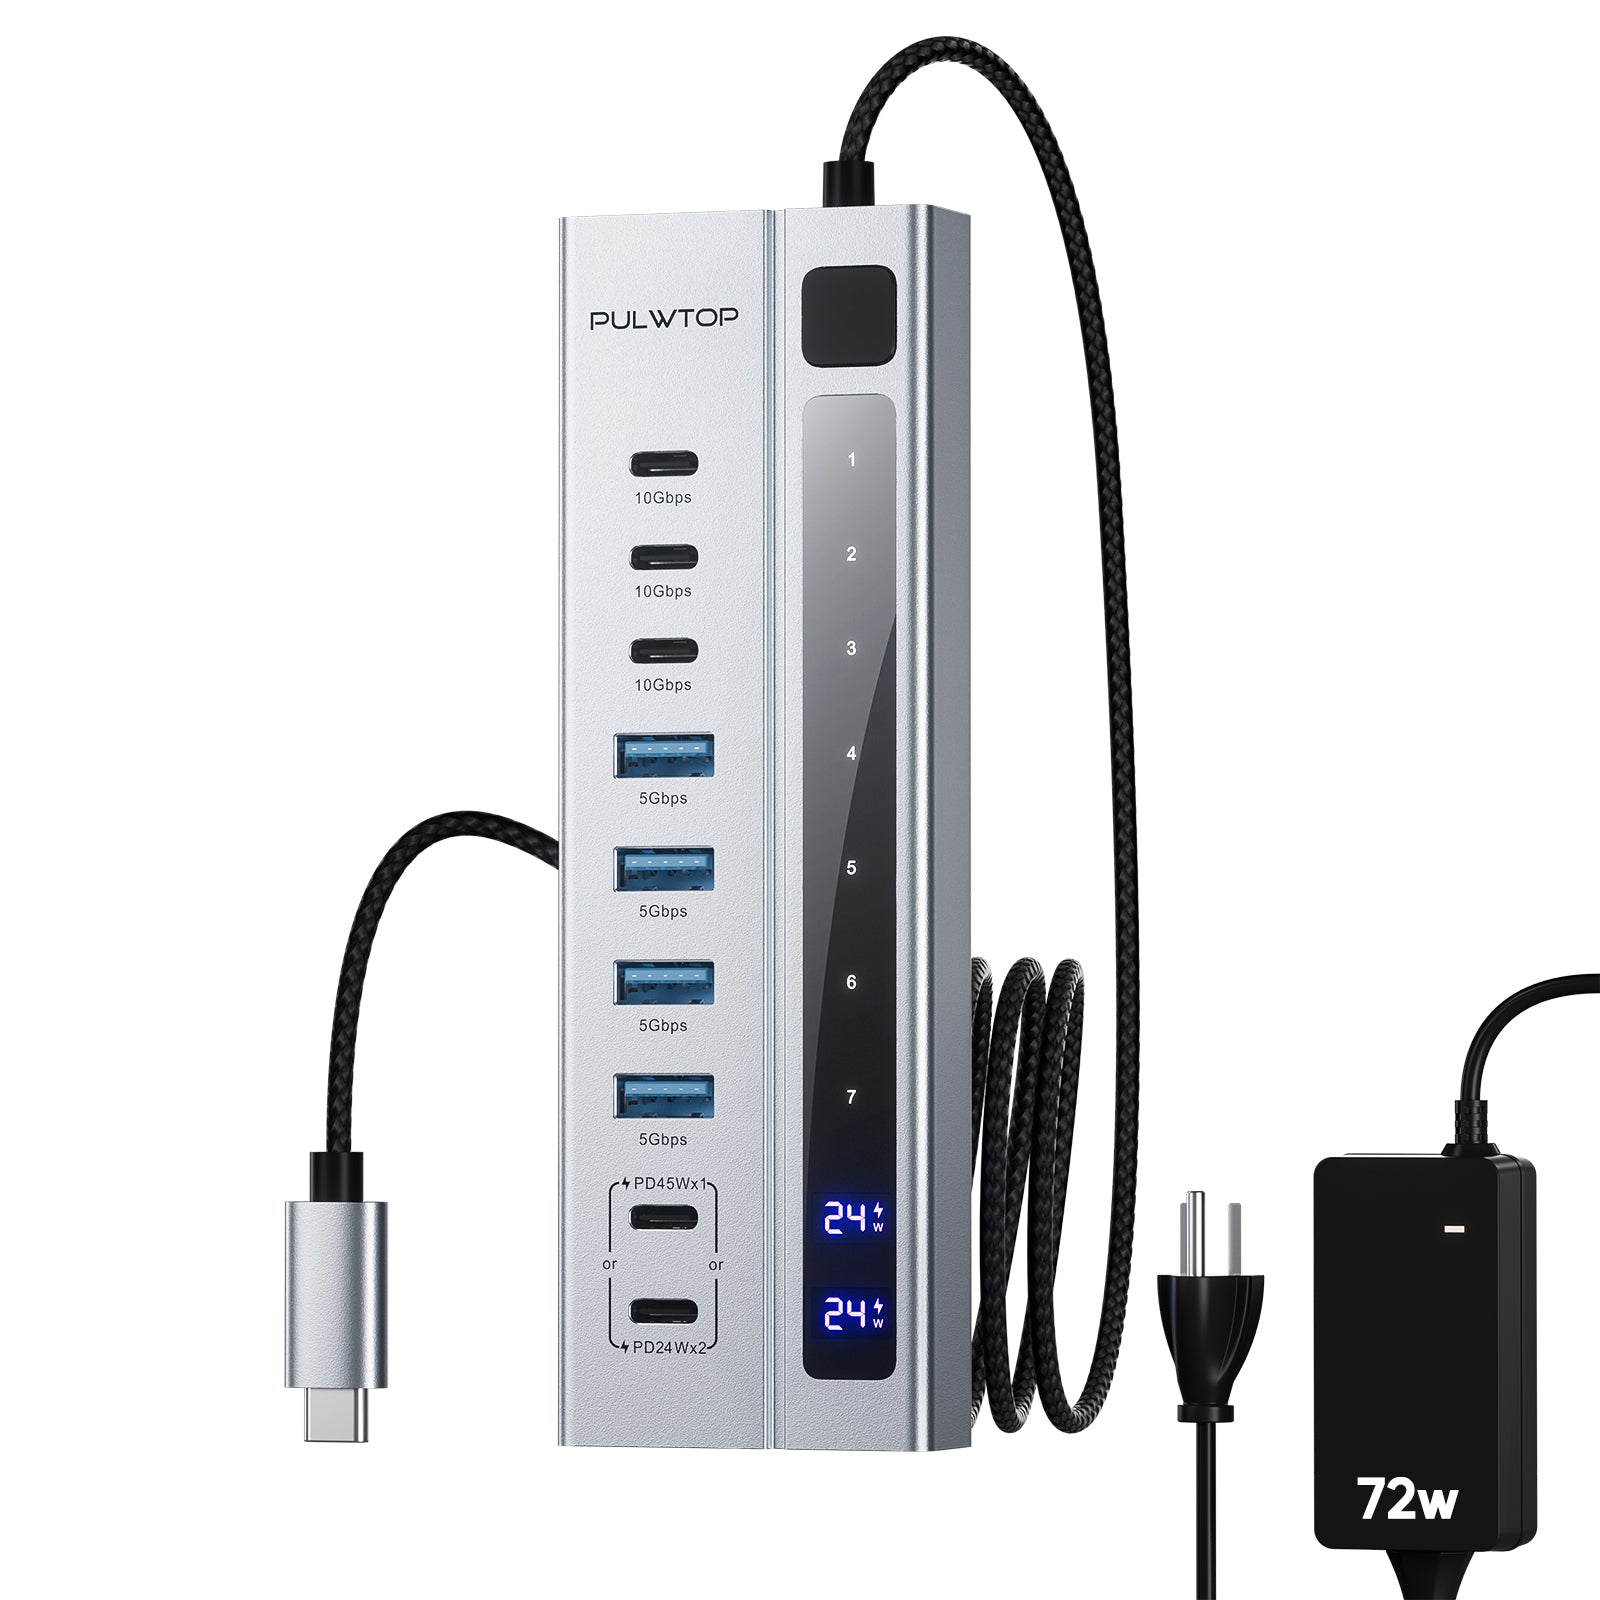 PULWTOP USB hub powered with 10Gbps data PD 45W charging (with 75W adapter for iMac, MacBook Pro/Air, iPad